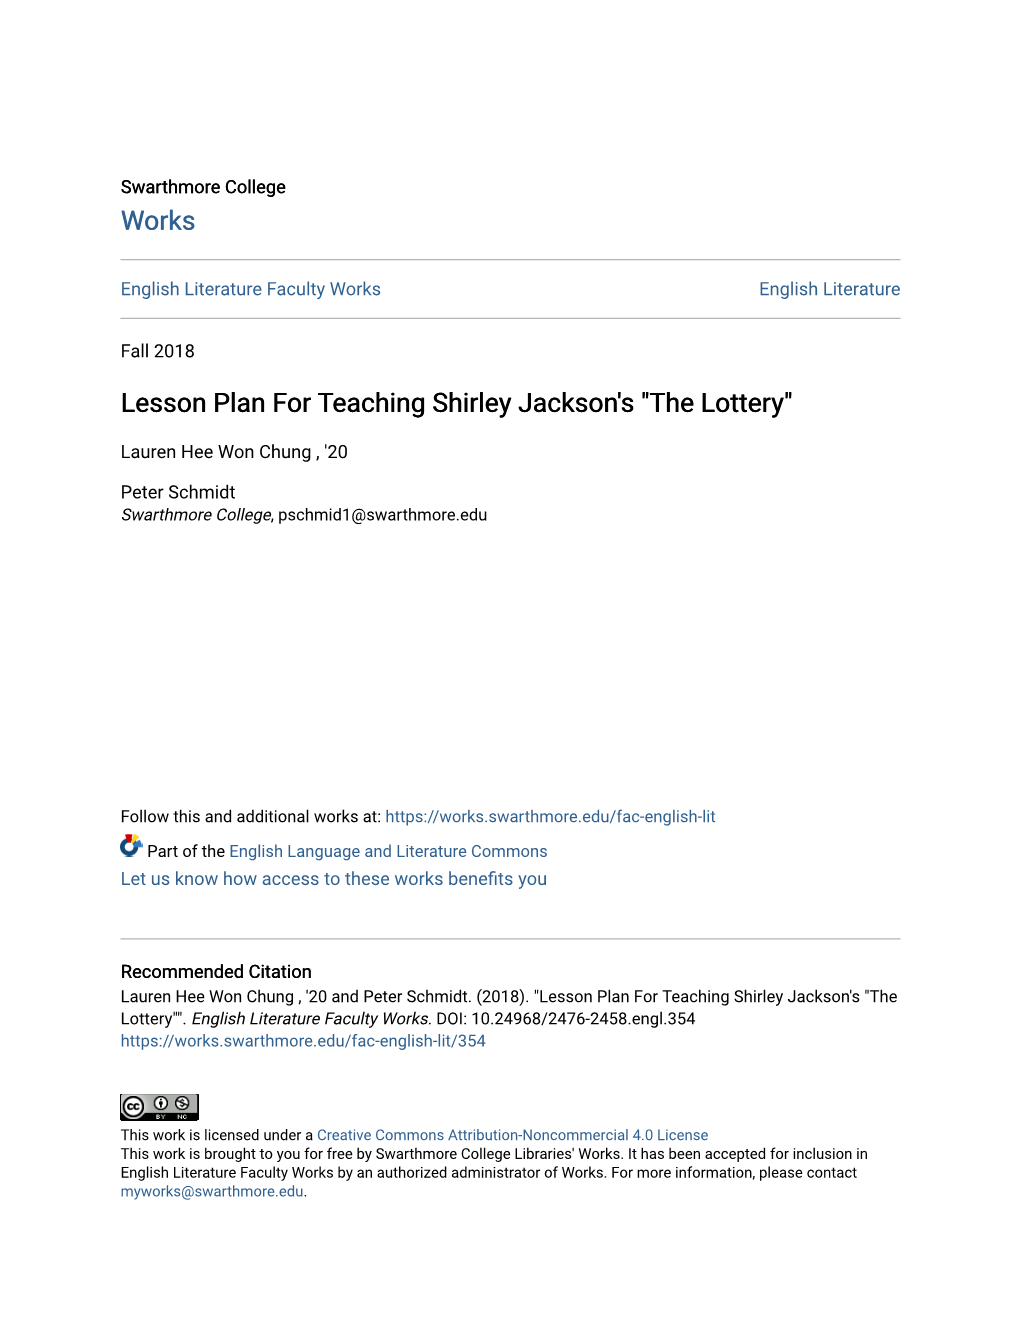 Lesson Plan for Teaching Shirley Jackson's "The Lottery"